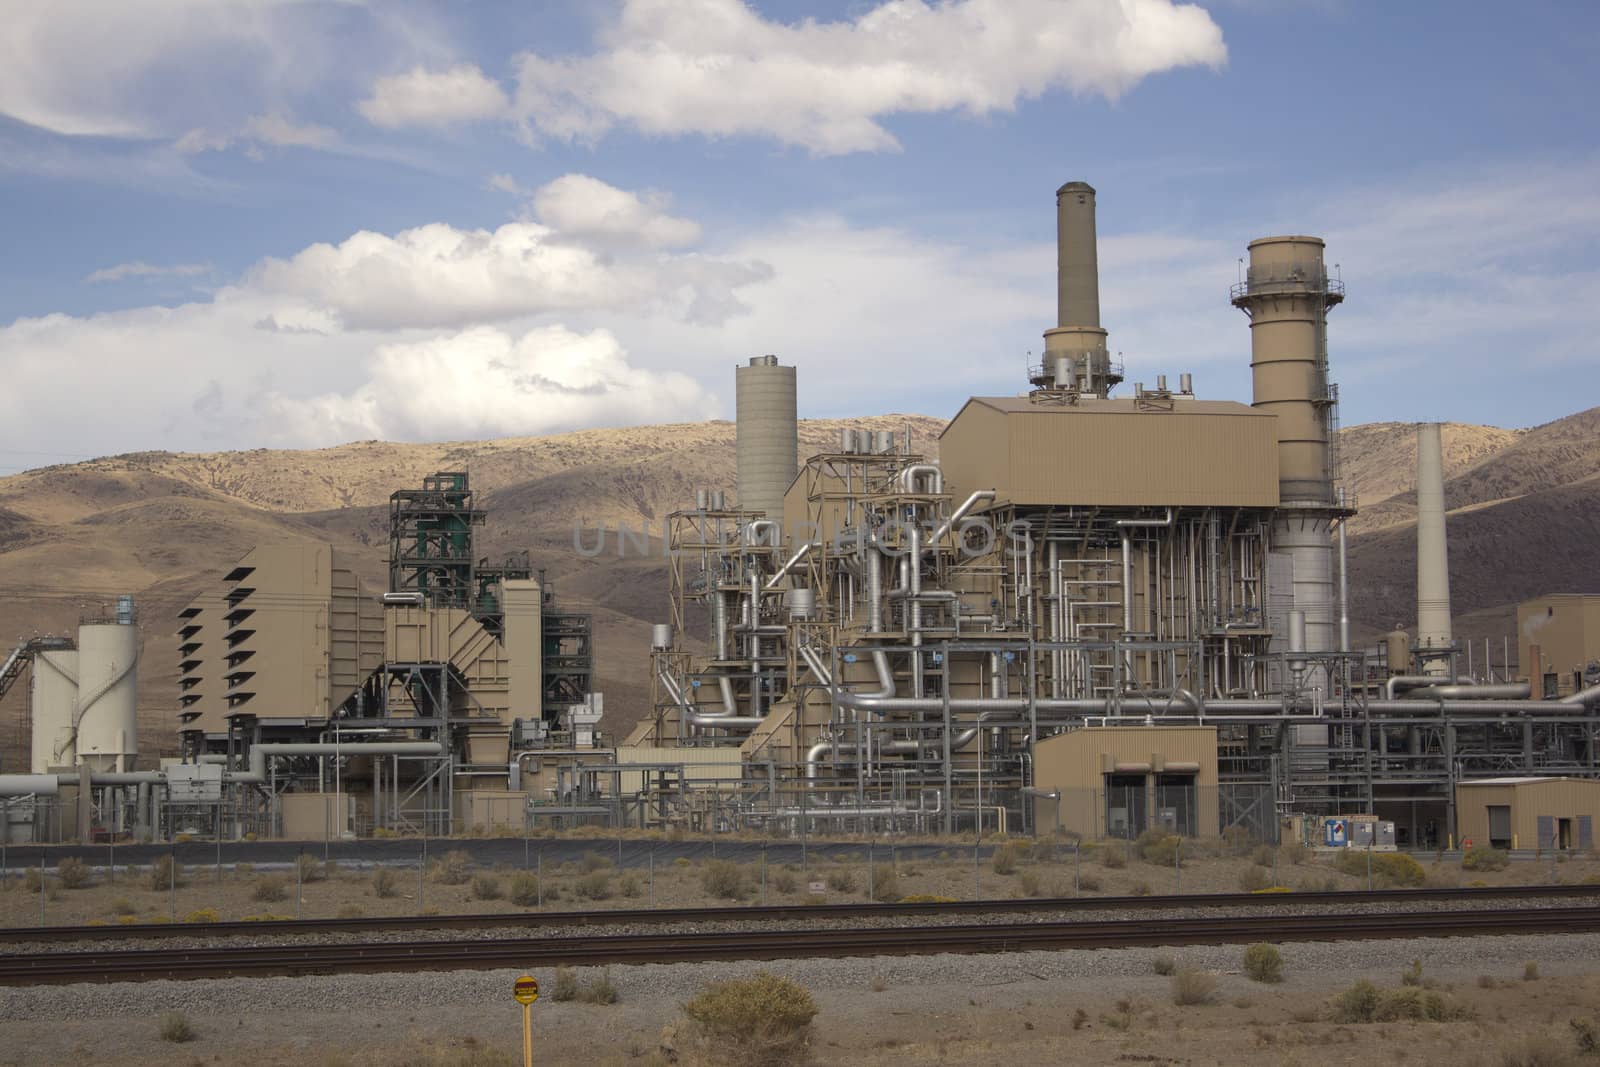 Power plant factory next to train track in the desert with blue cloudy skies